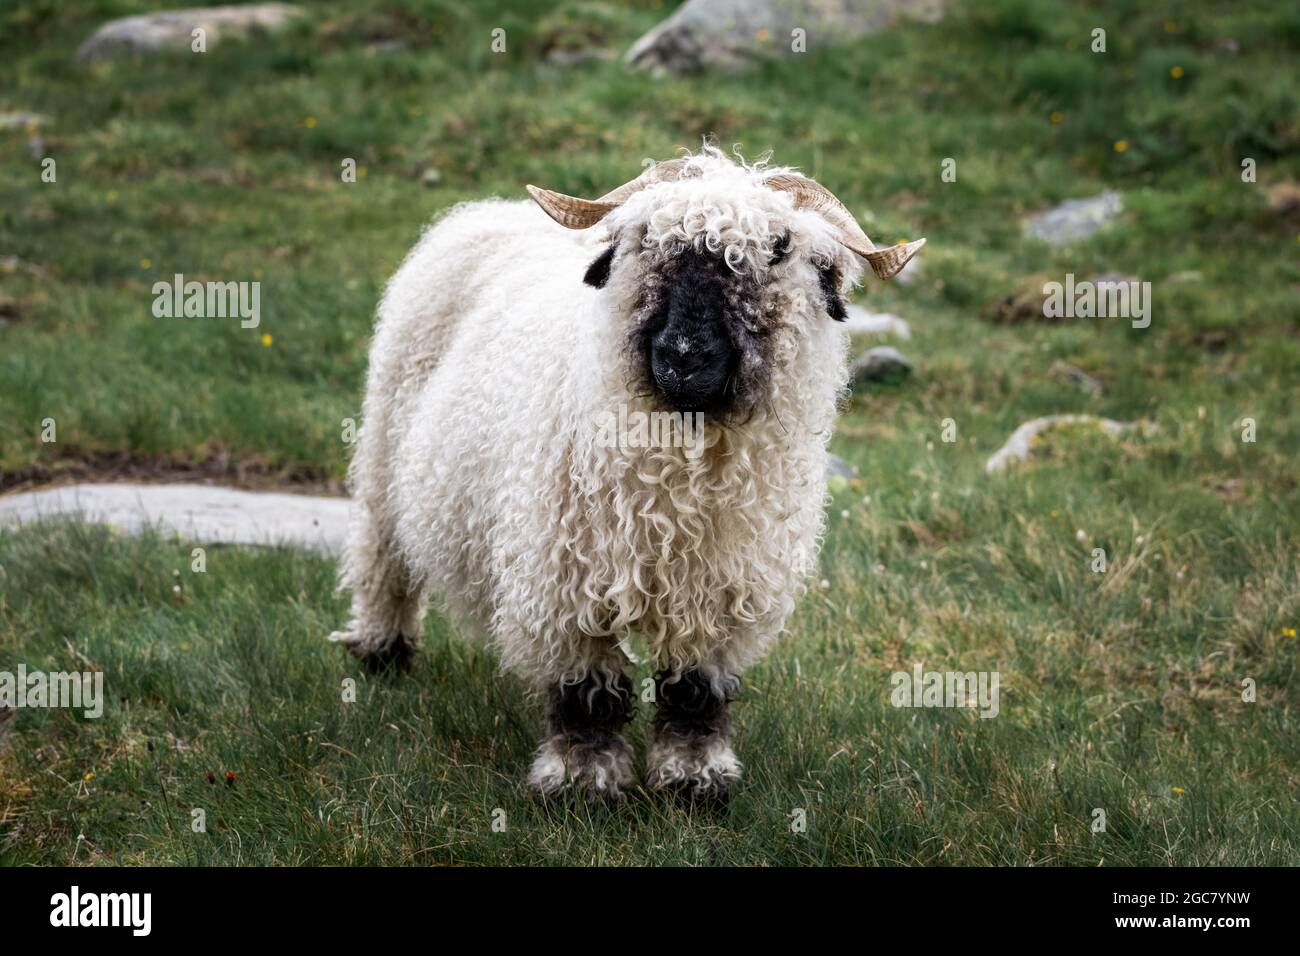 Valais Blacknose sheep in Zermatt, Switzerland, during summer.  Valais Blacknose is a breed of domestic sheep originating in the Valais region of Swit Stock Photo